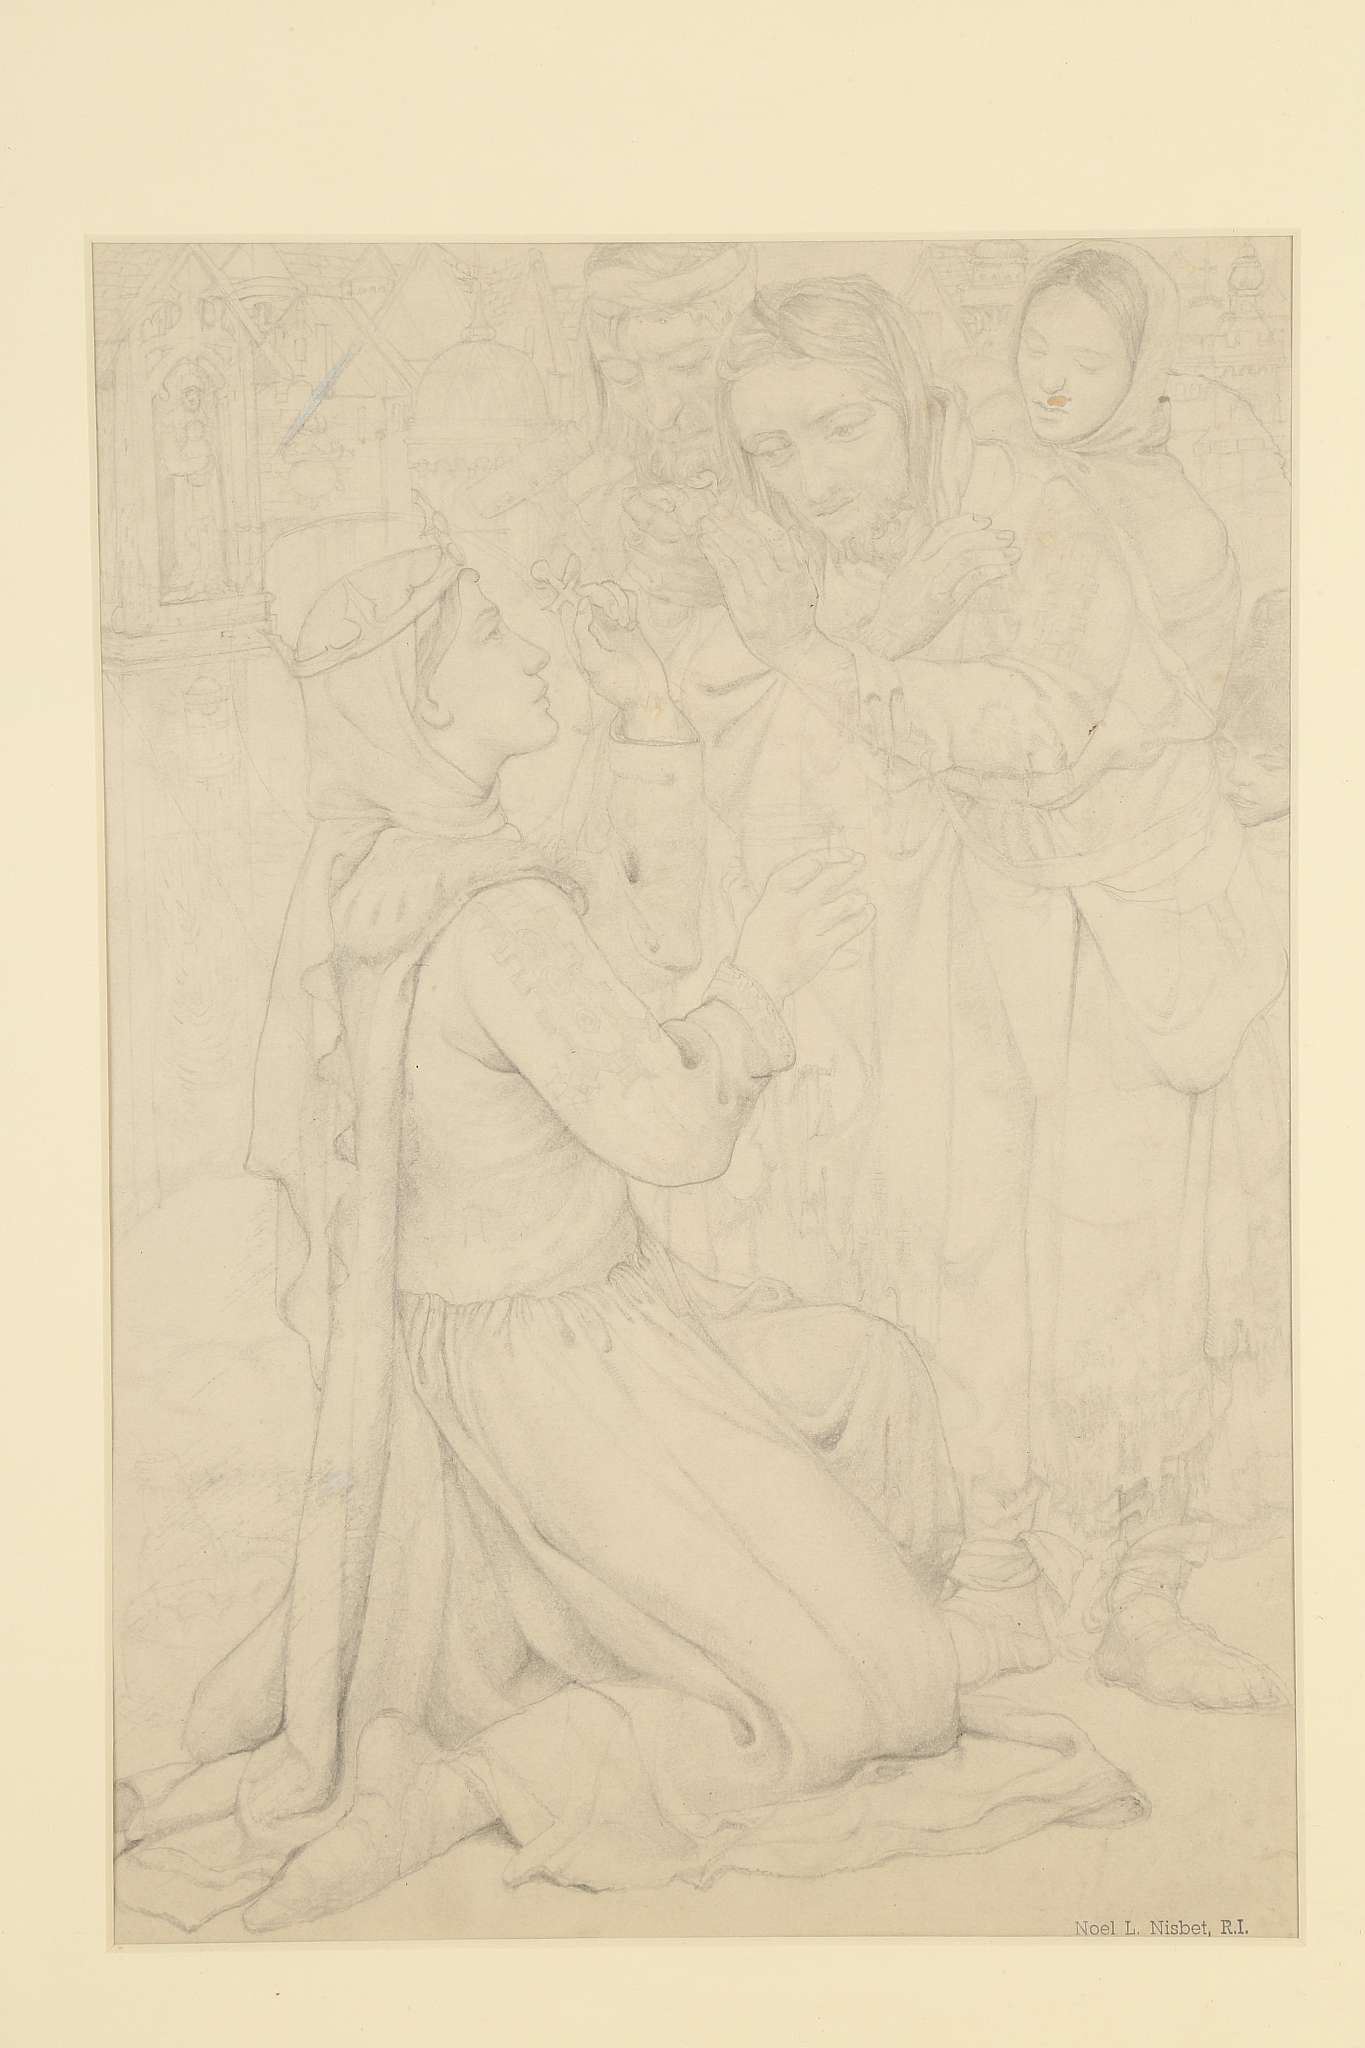 Noel Laura Nisbet R.I. 1881-1956, 'The Blessing', pencil with studio secession stamp lower right, - Image 2 of 8